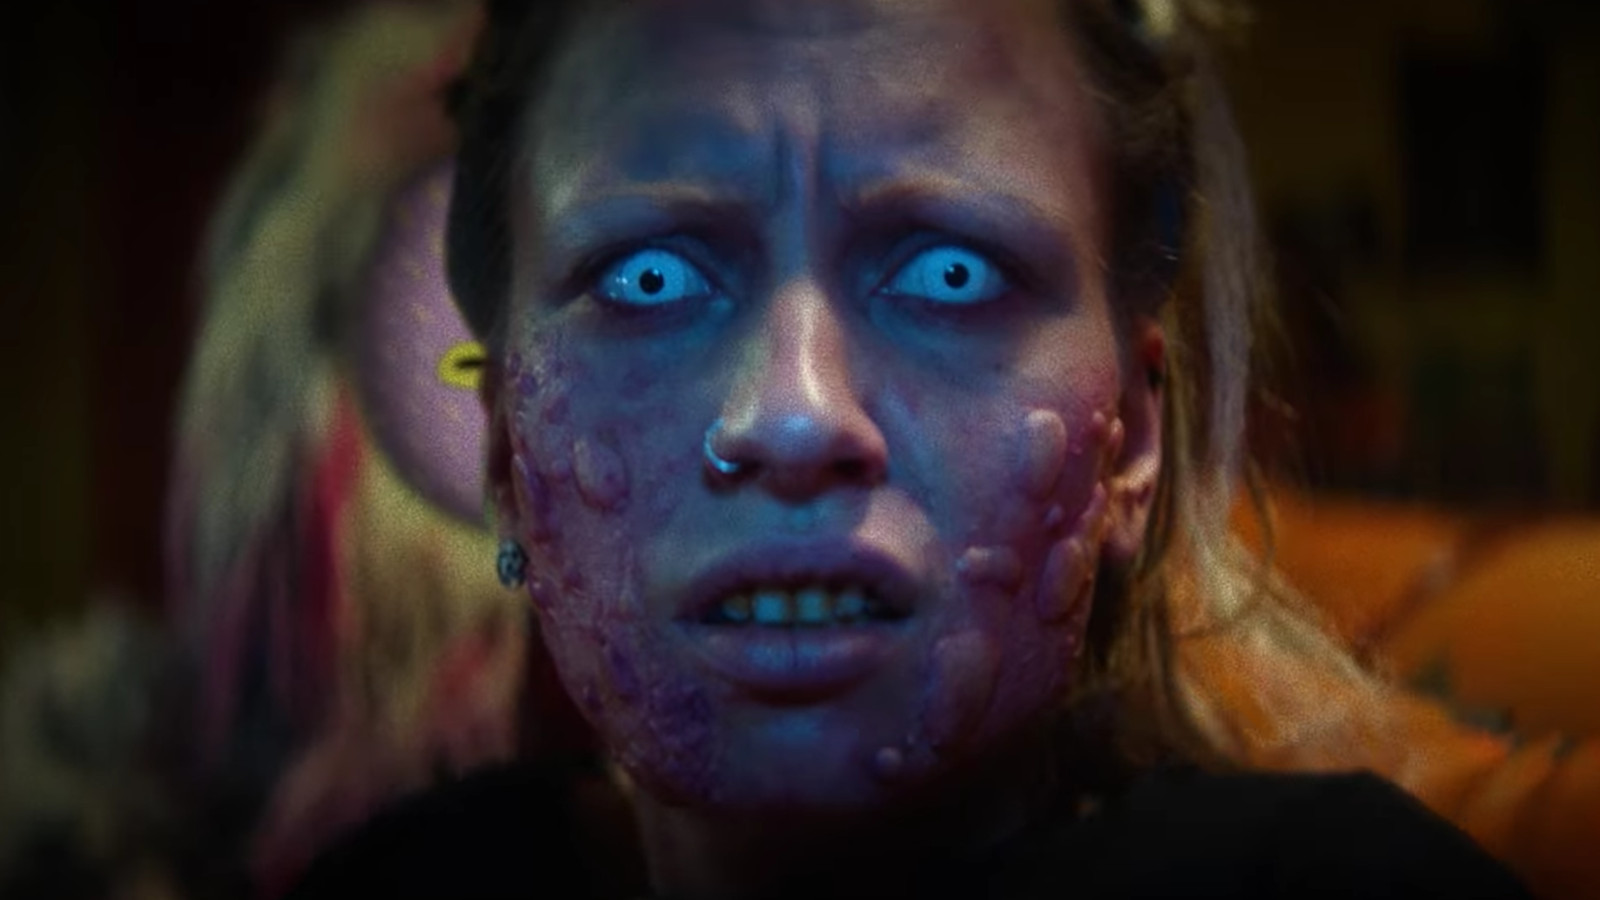 'Ash': Flying Lotus Returns to the Genre With Sci-Fi Horror Pic!